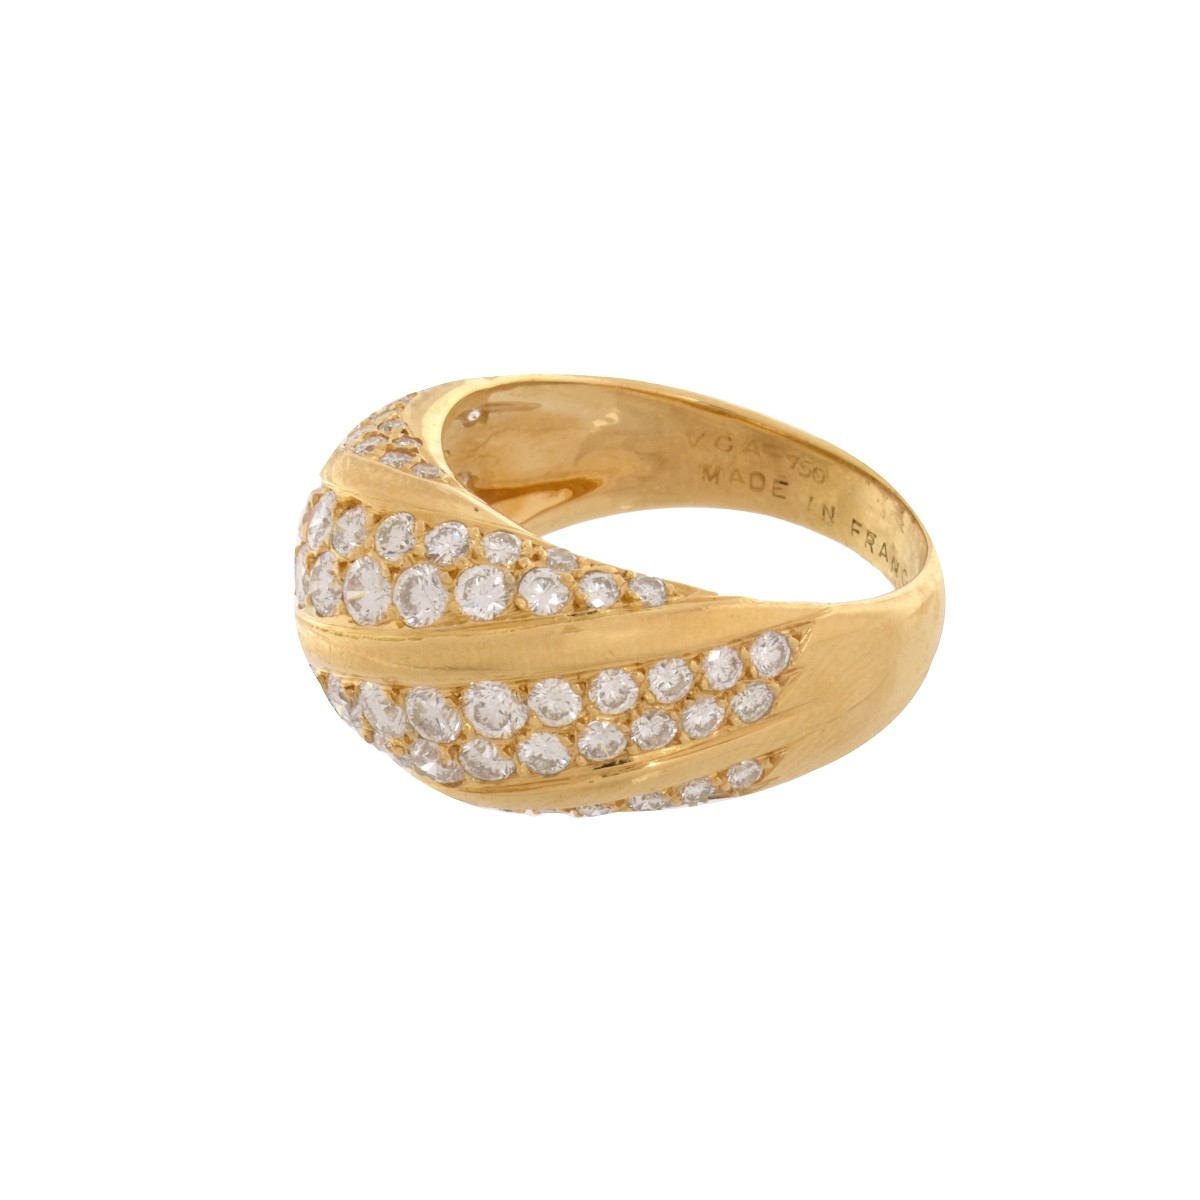 VCA Diamond and 18K Ring | Kodner Auctions